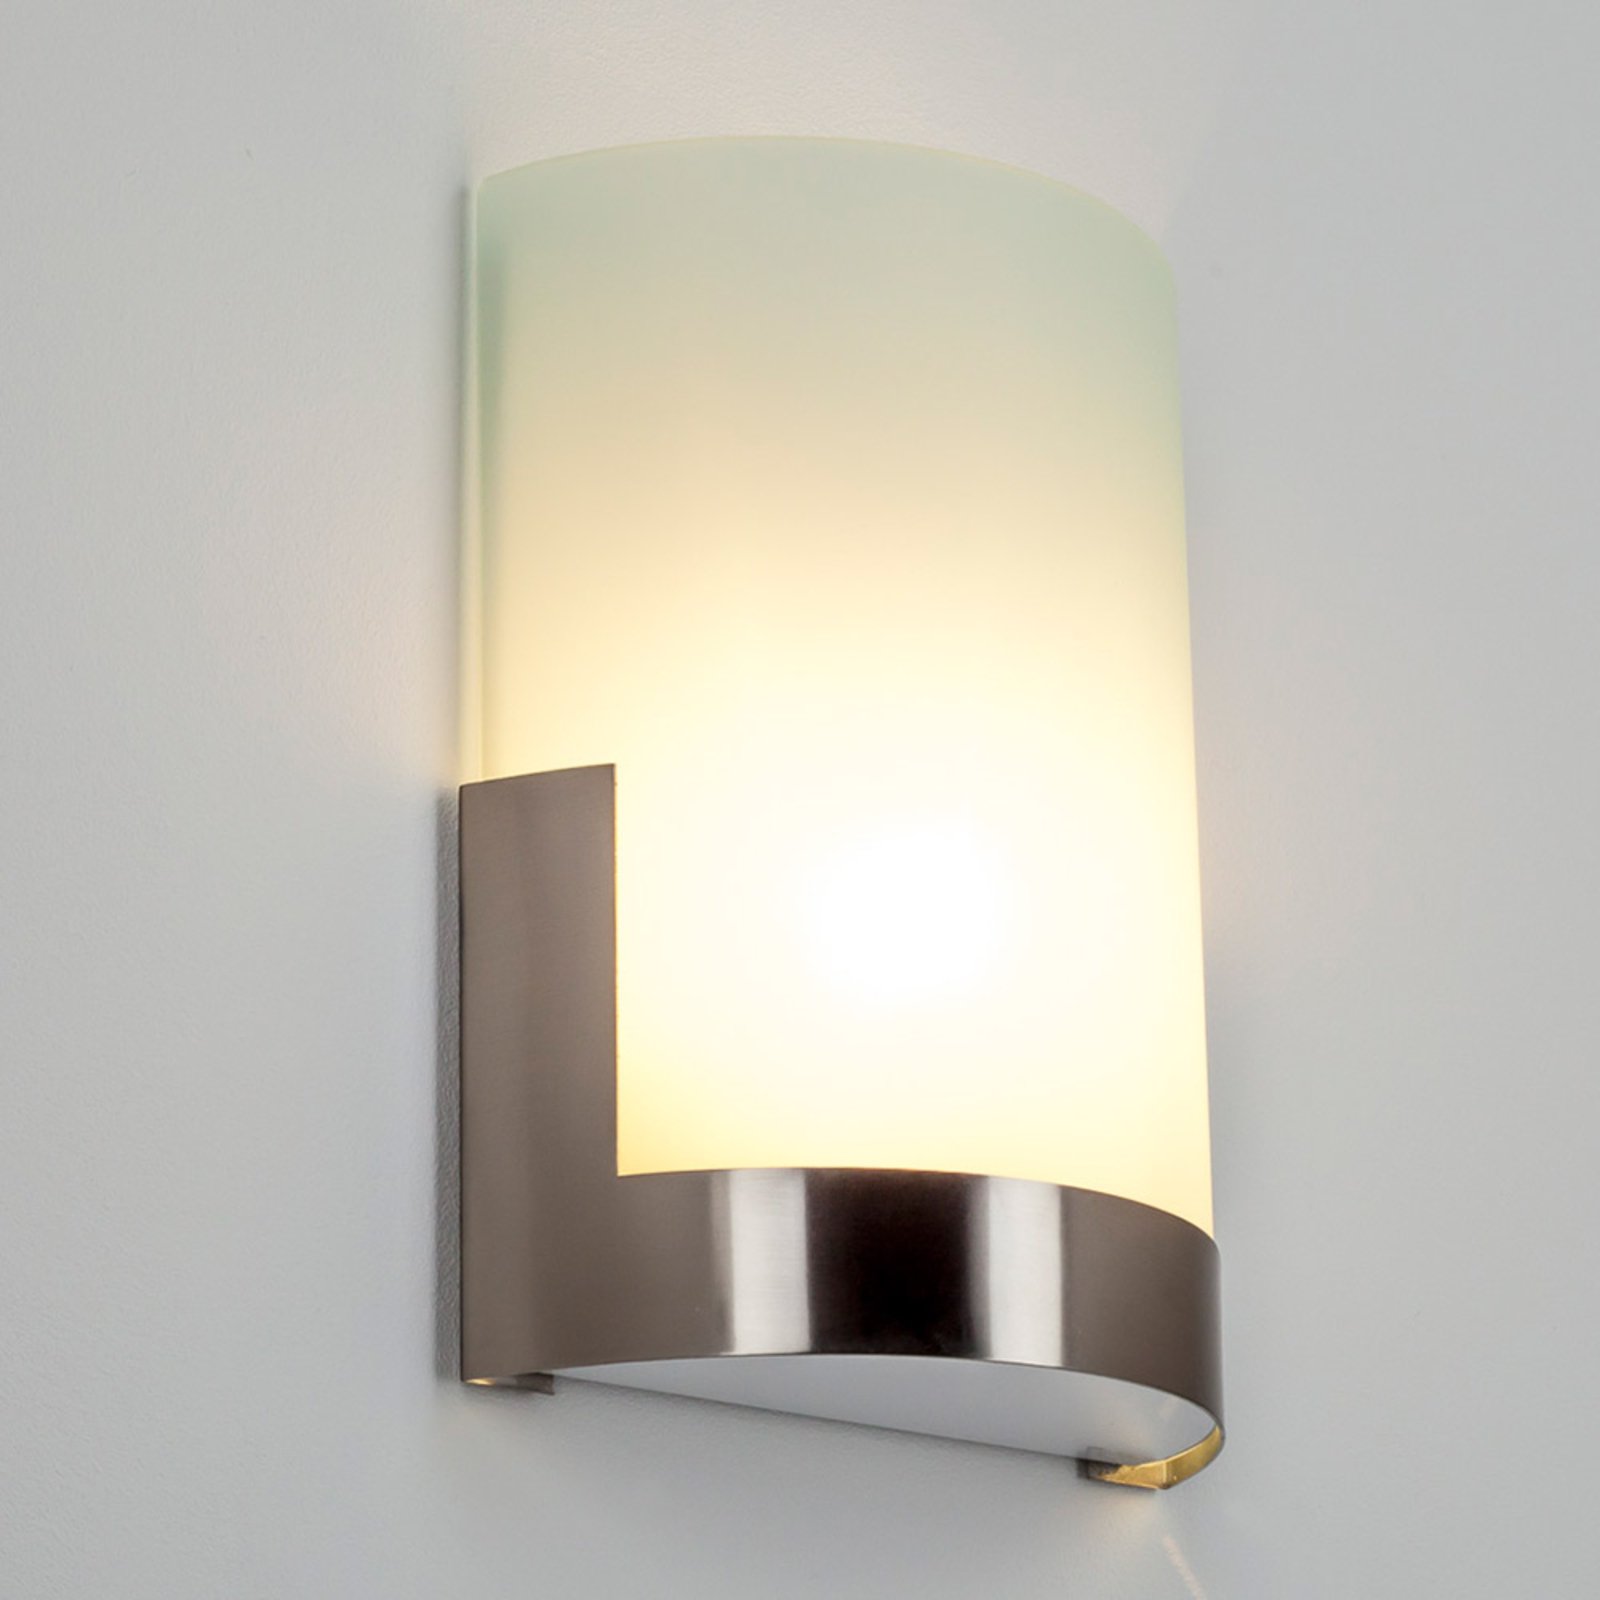 Karla Stylish Wall Lamp with Metal Element